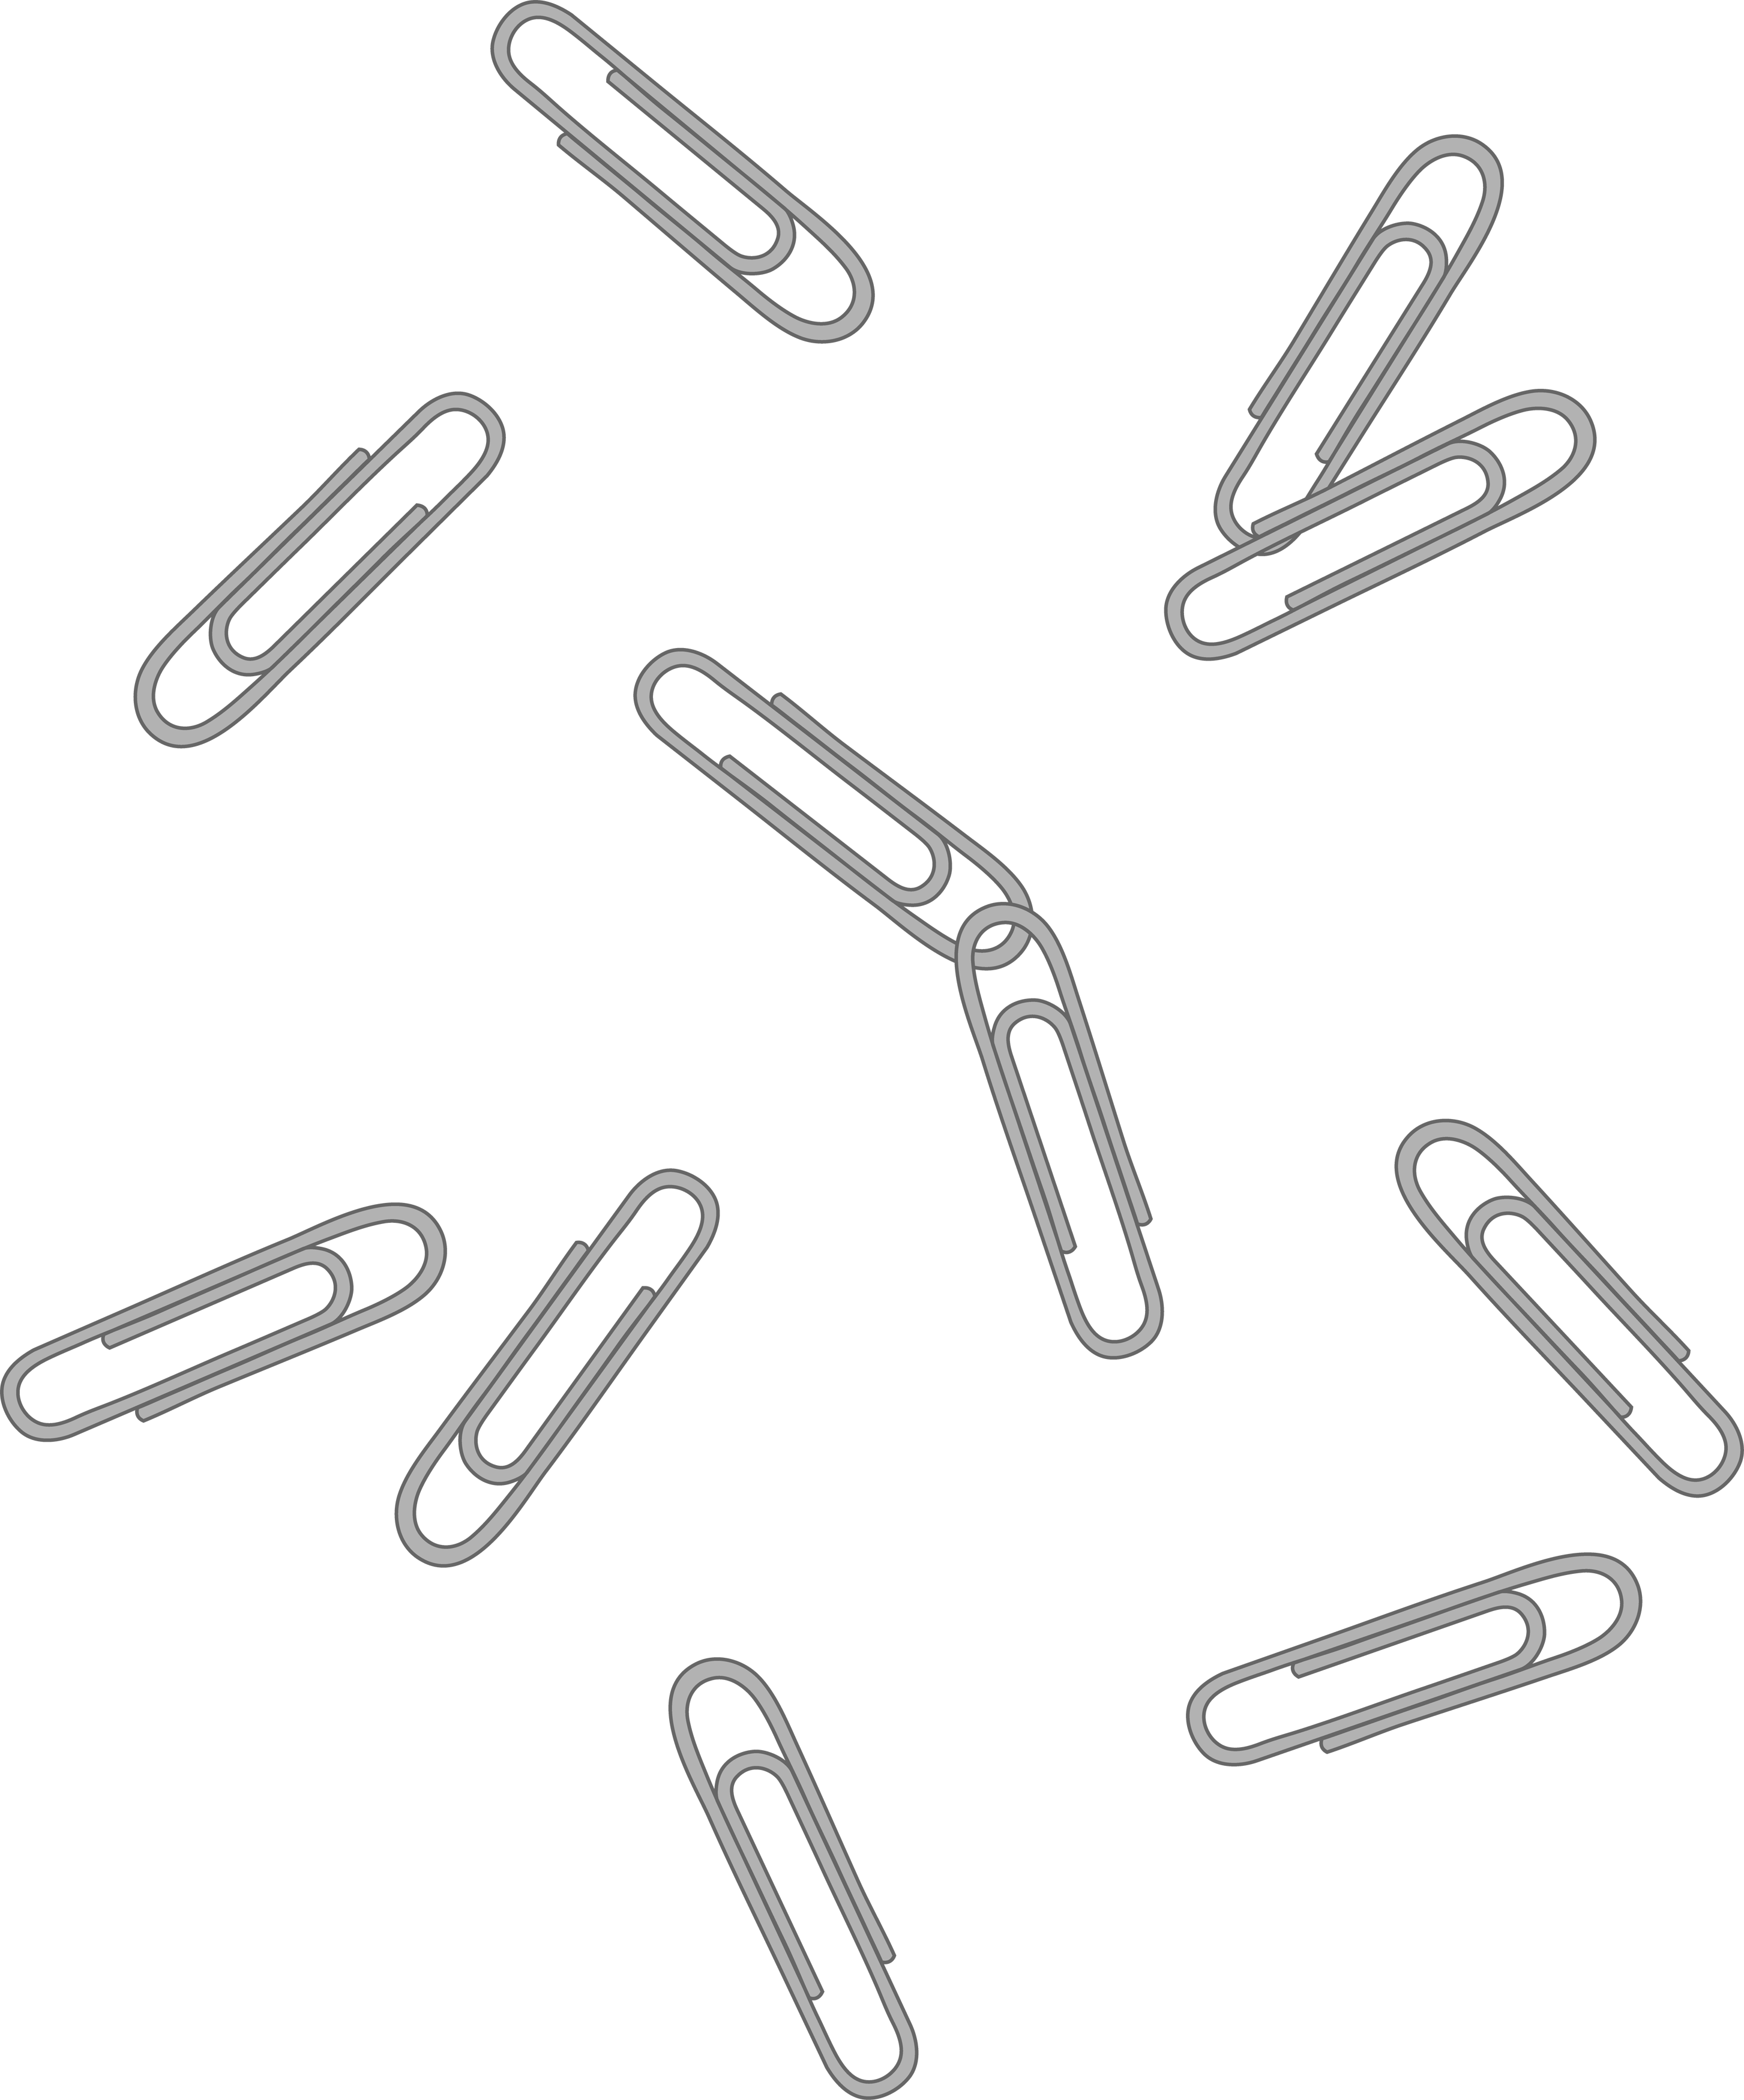 A Group Of Paper Clips On A Black Background